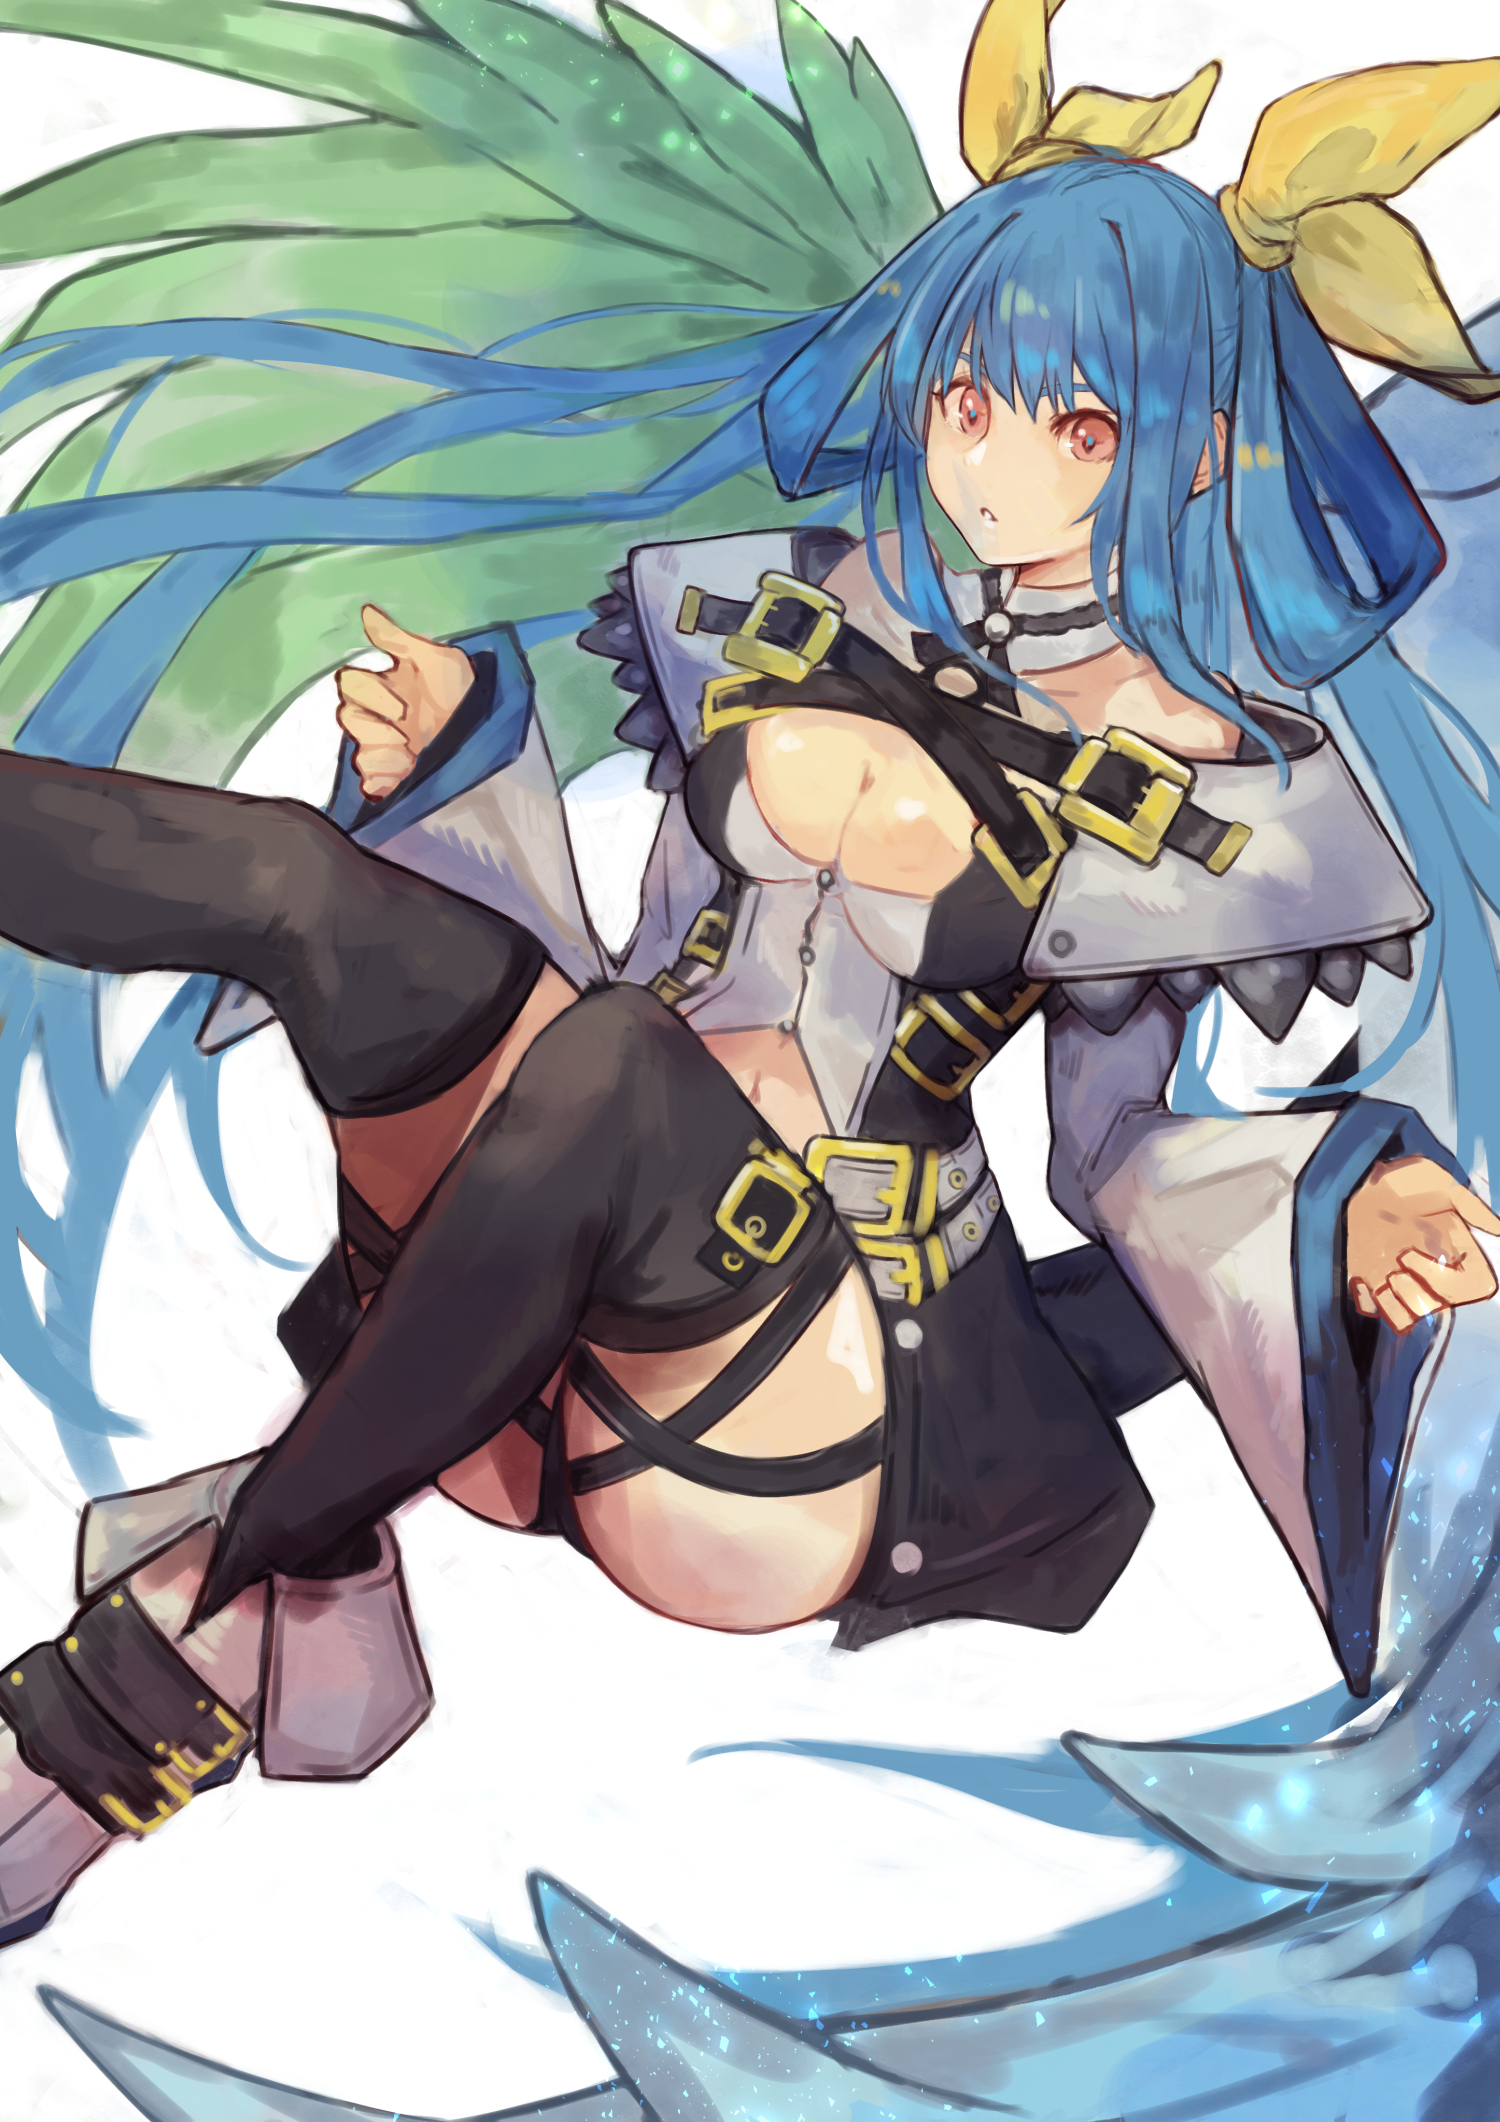 __dizzy_guilty_gear_and_1_more_drawn_by_levvellevvel__bb74afa4ed2582addfc22d1bcc419eb0.jpg